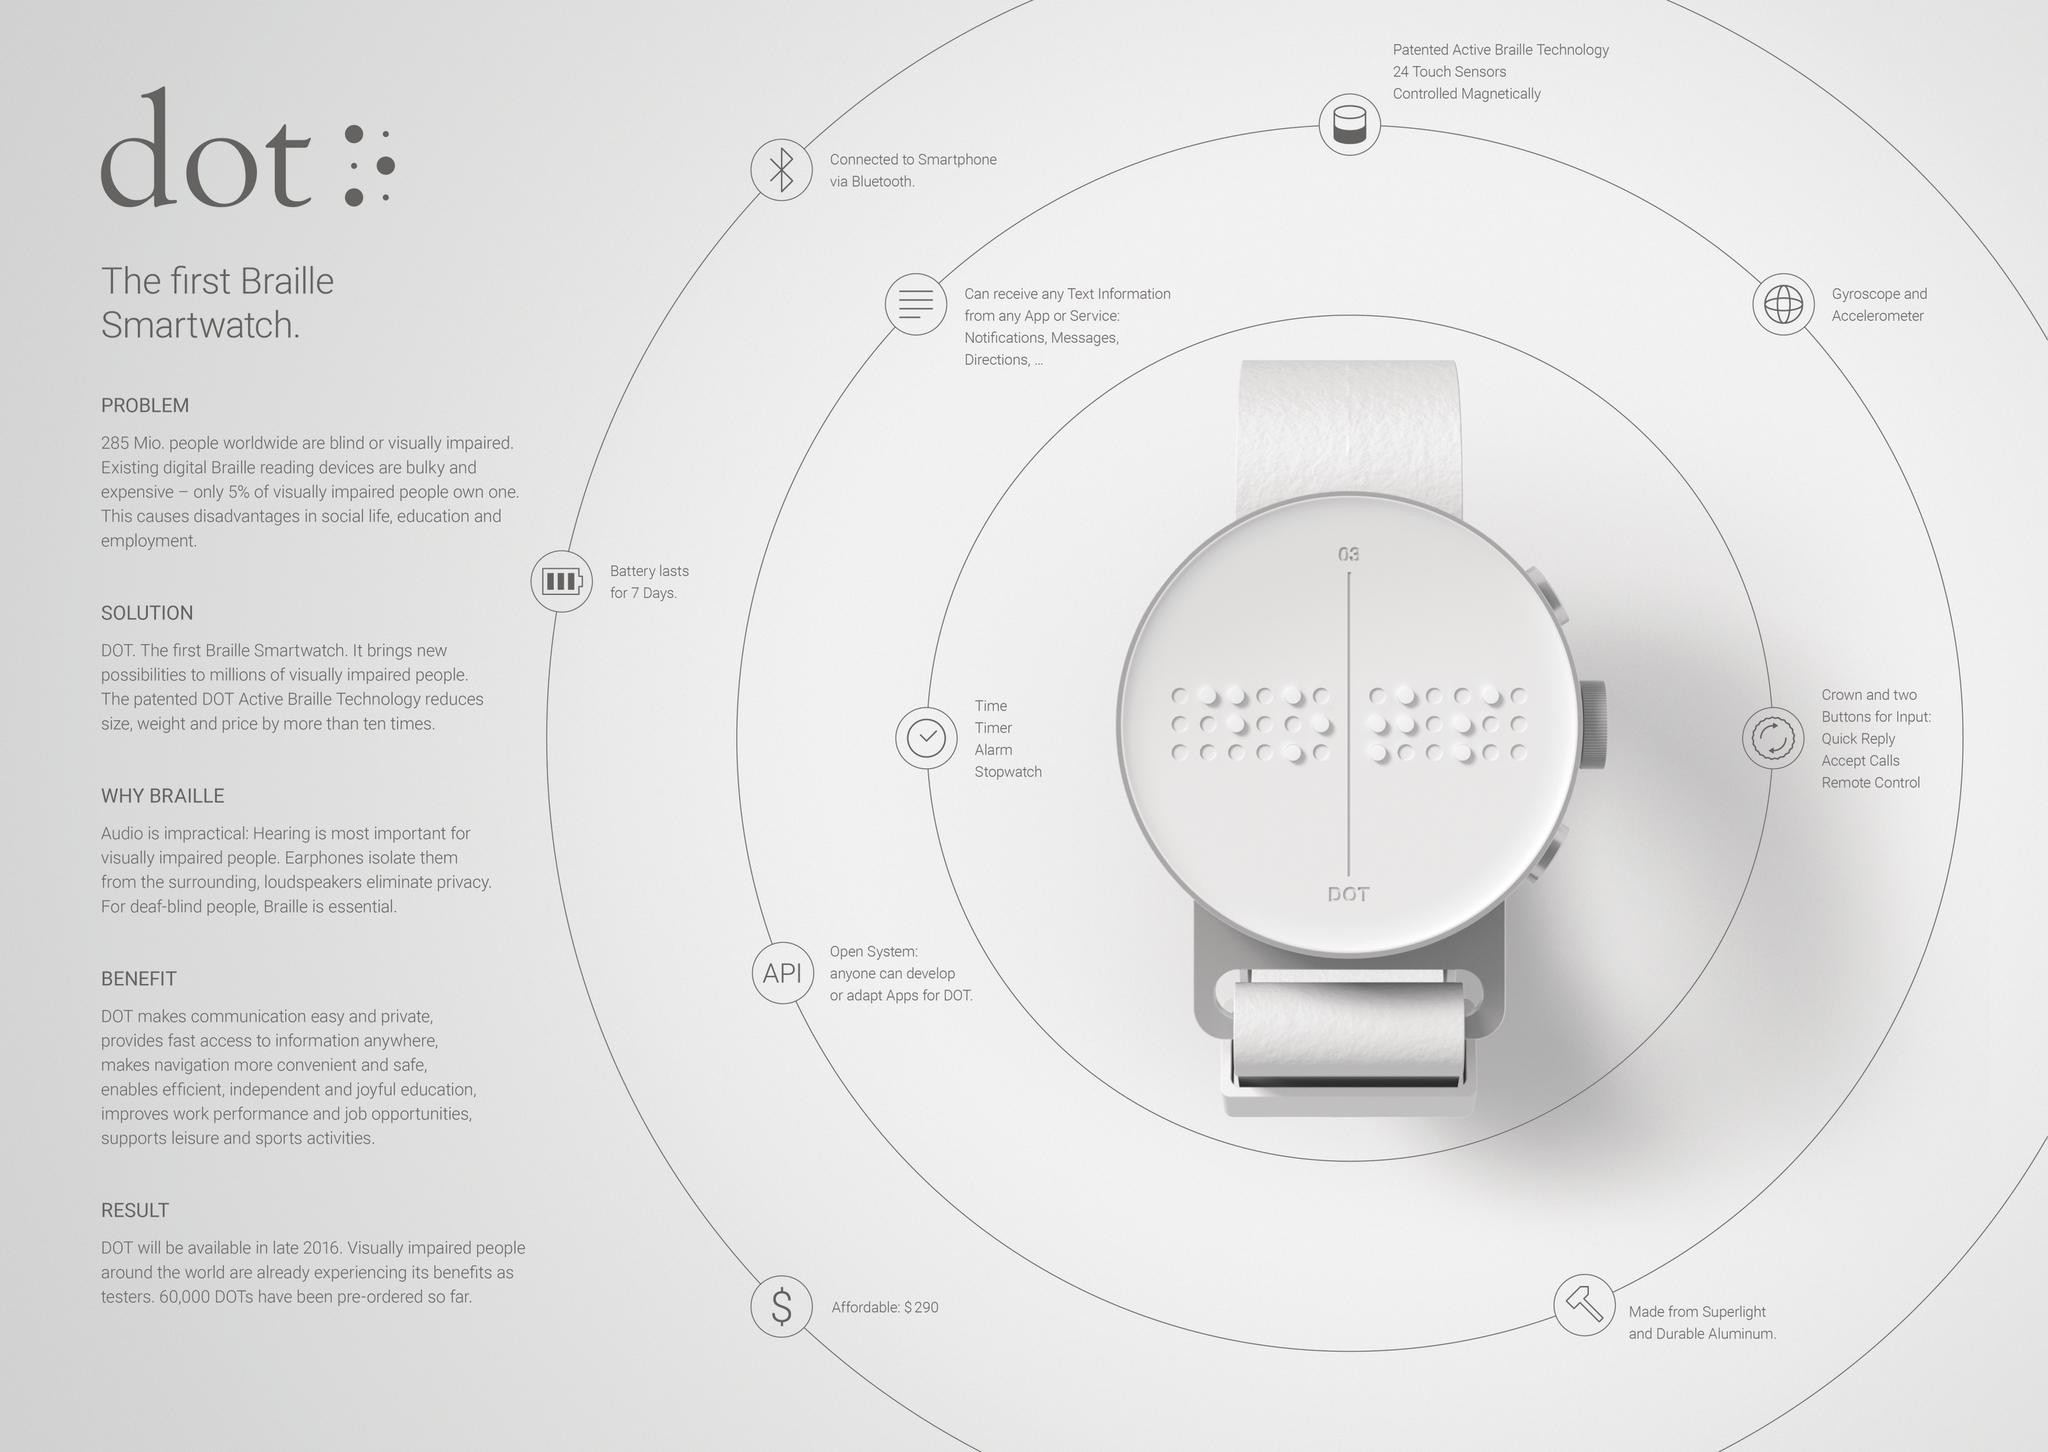 DOT. THE FIRST BRAILLE SMARTWATCH.